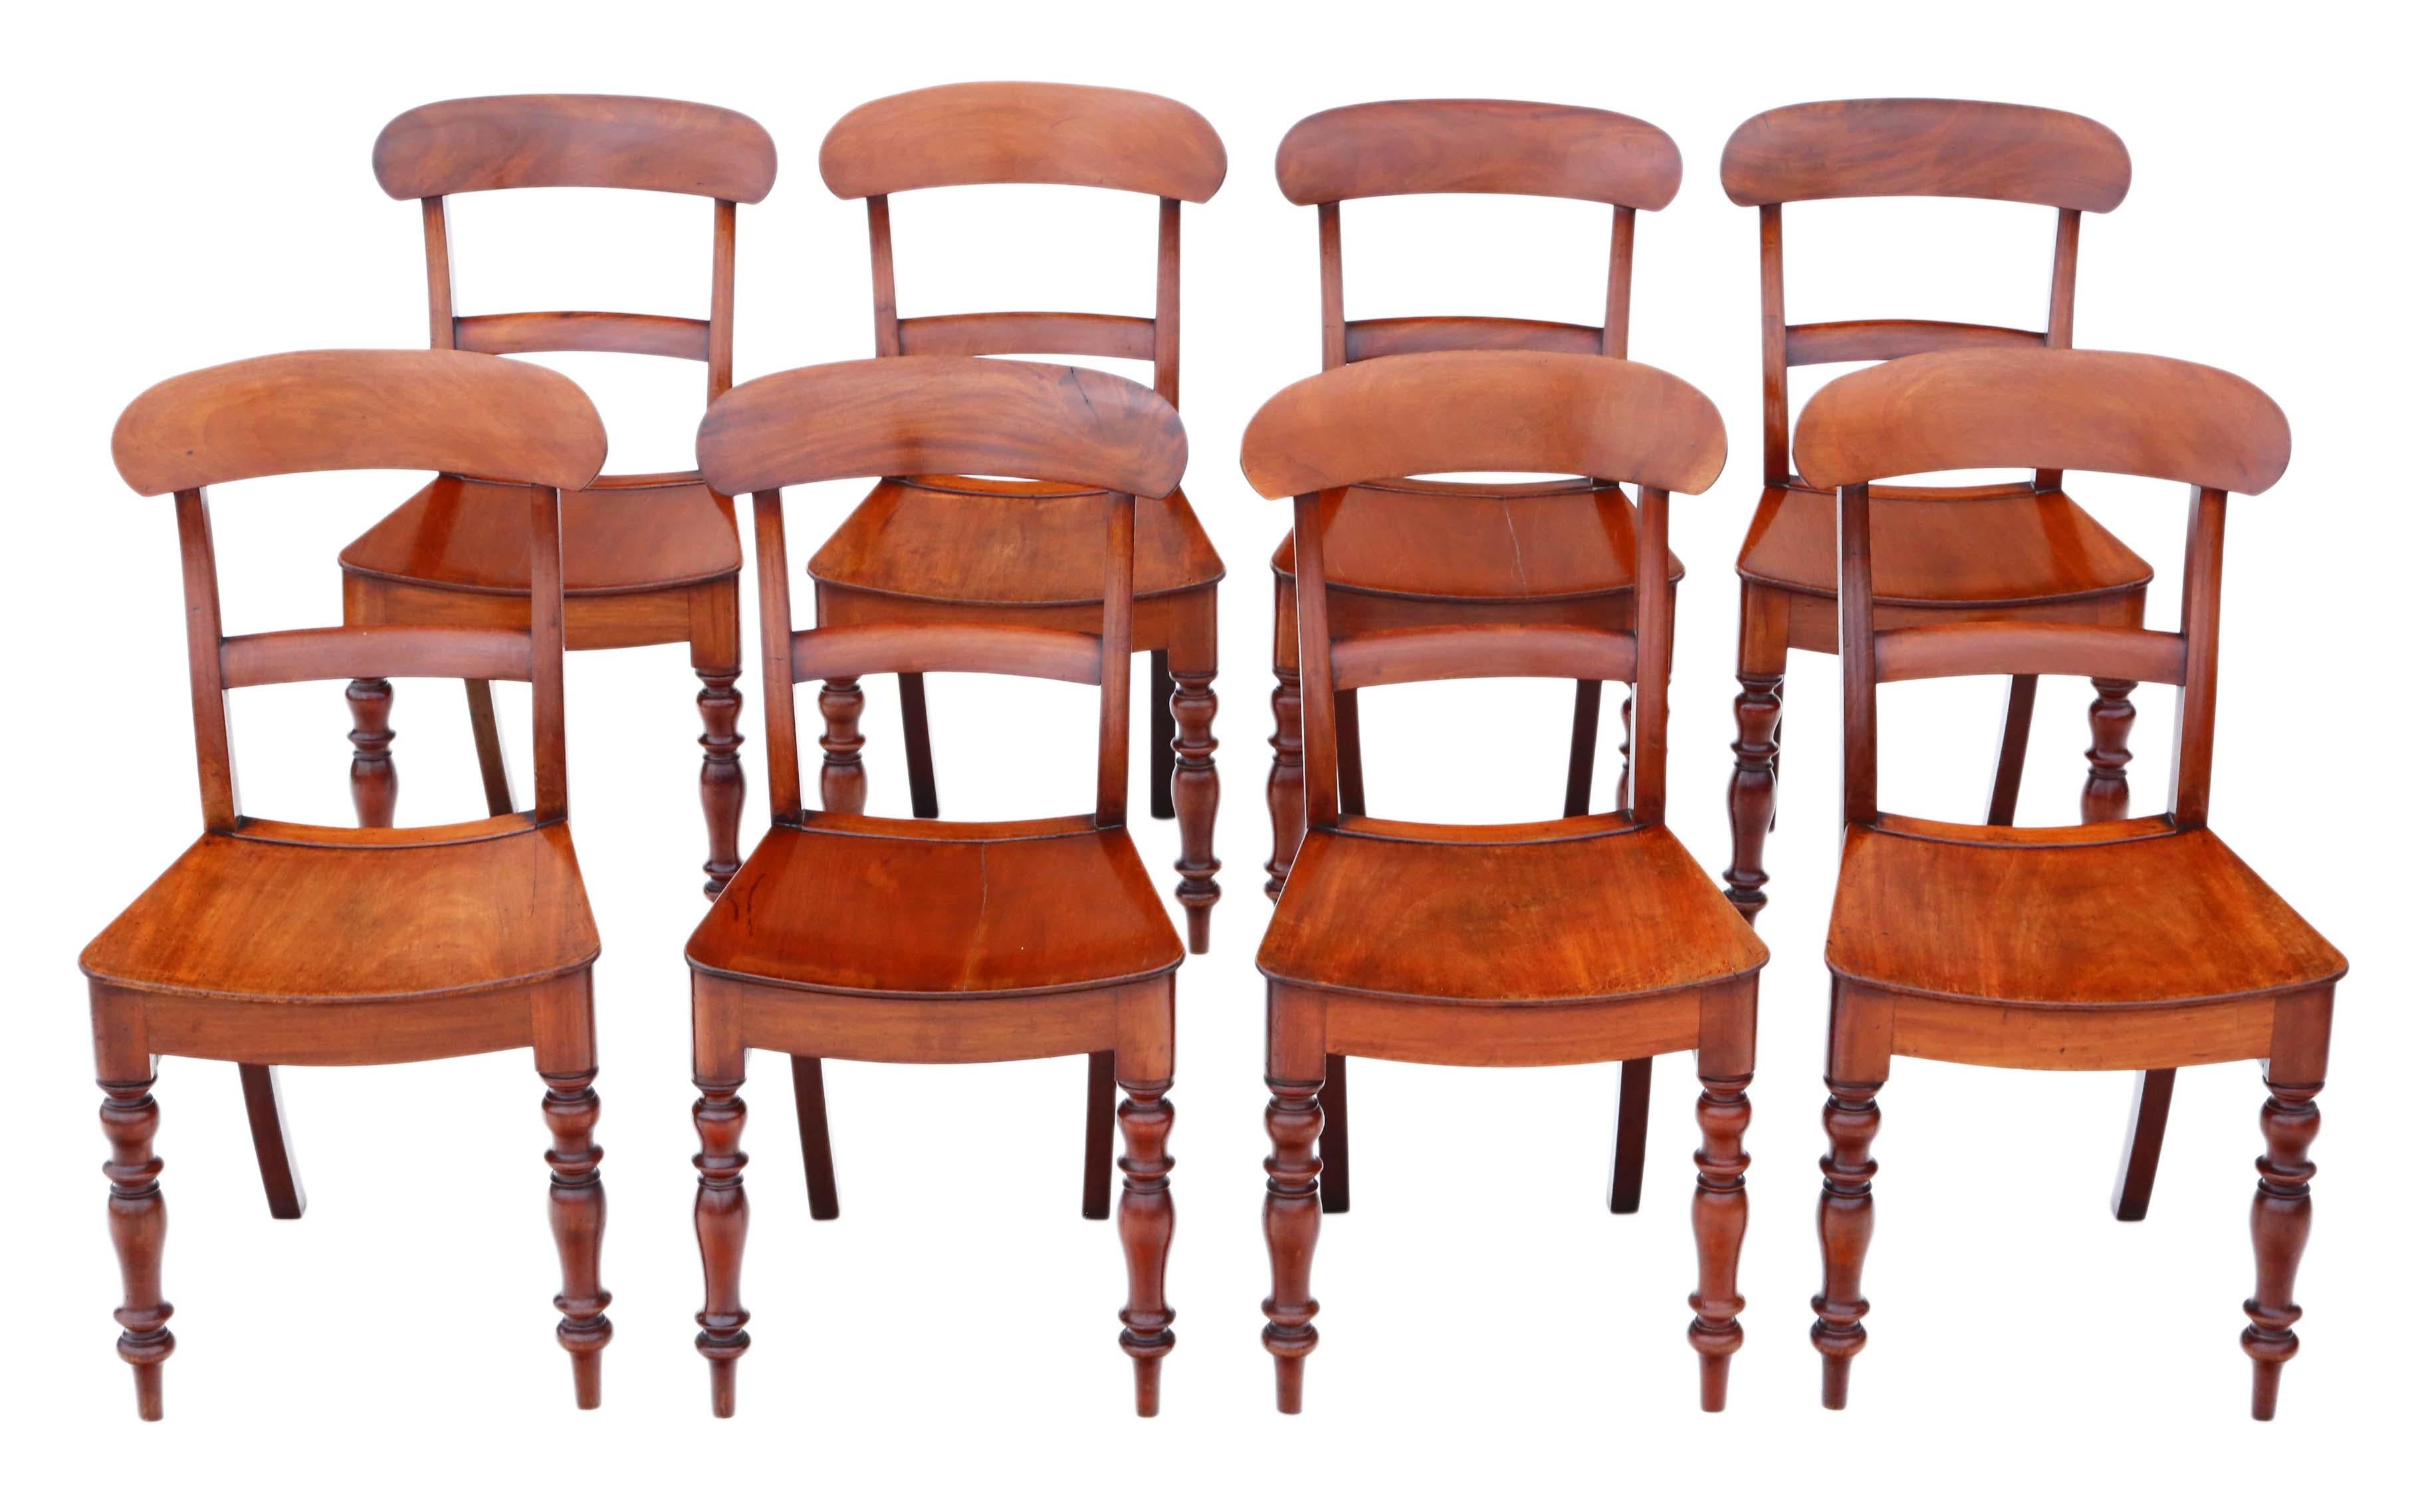 Set of 8 19th Century Mahogany Dining Chairs - Antique Quality For Sale